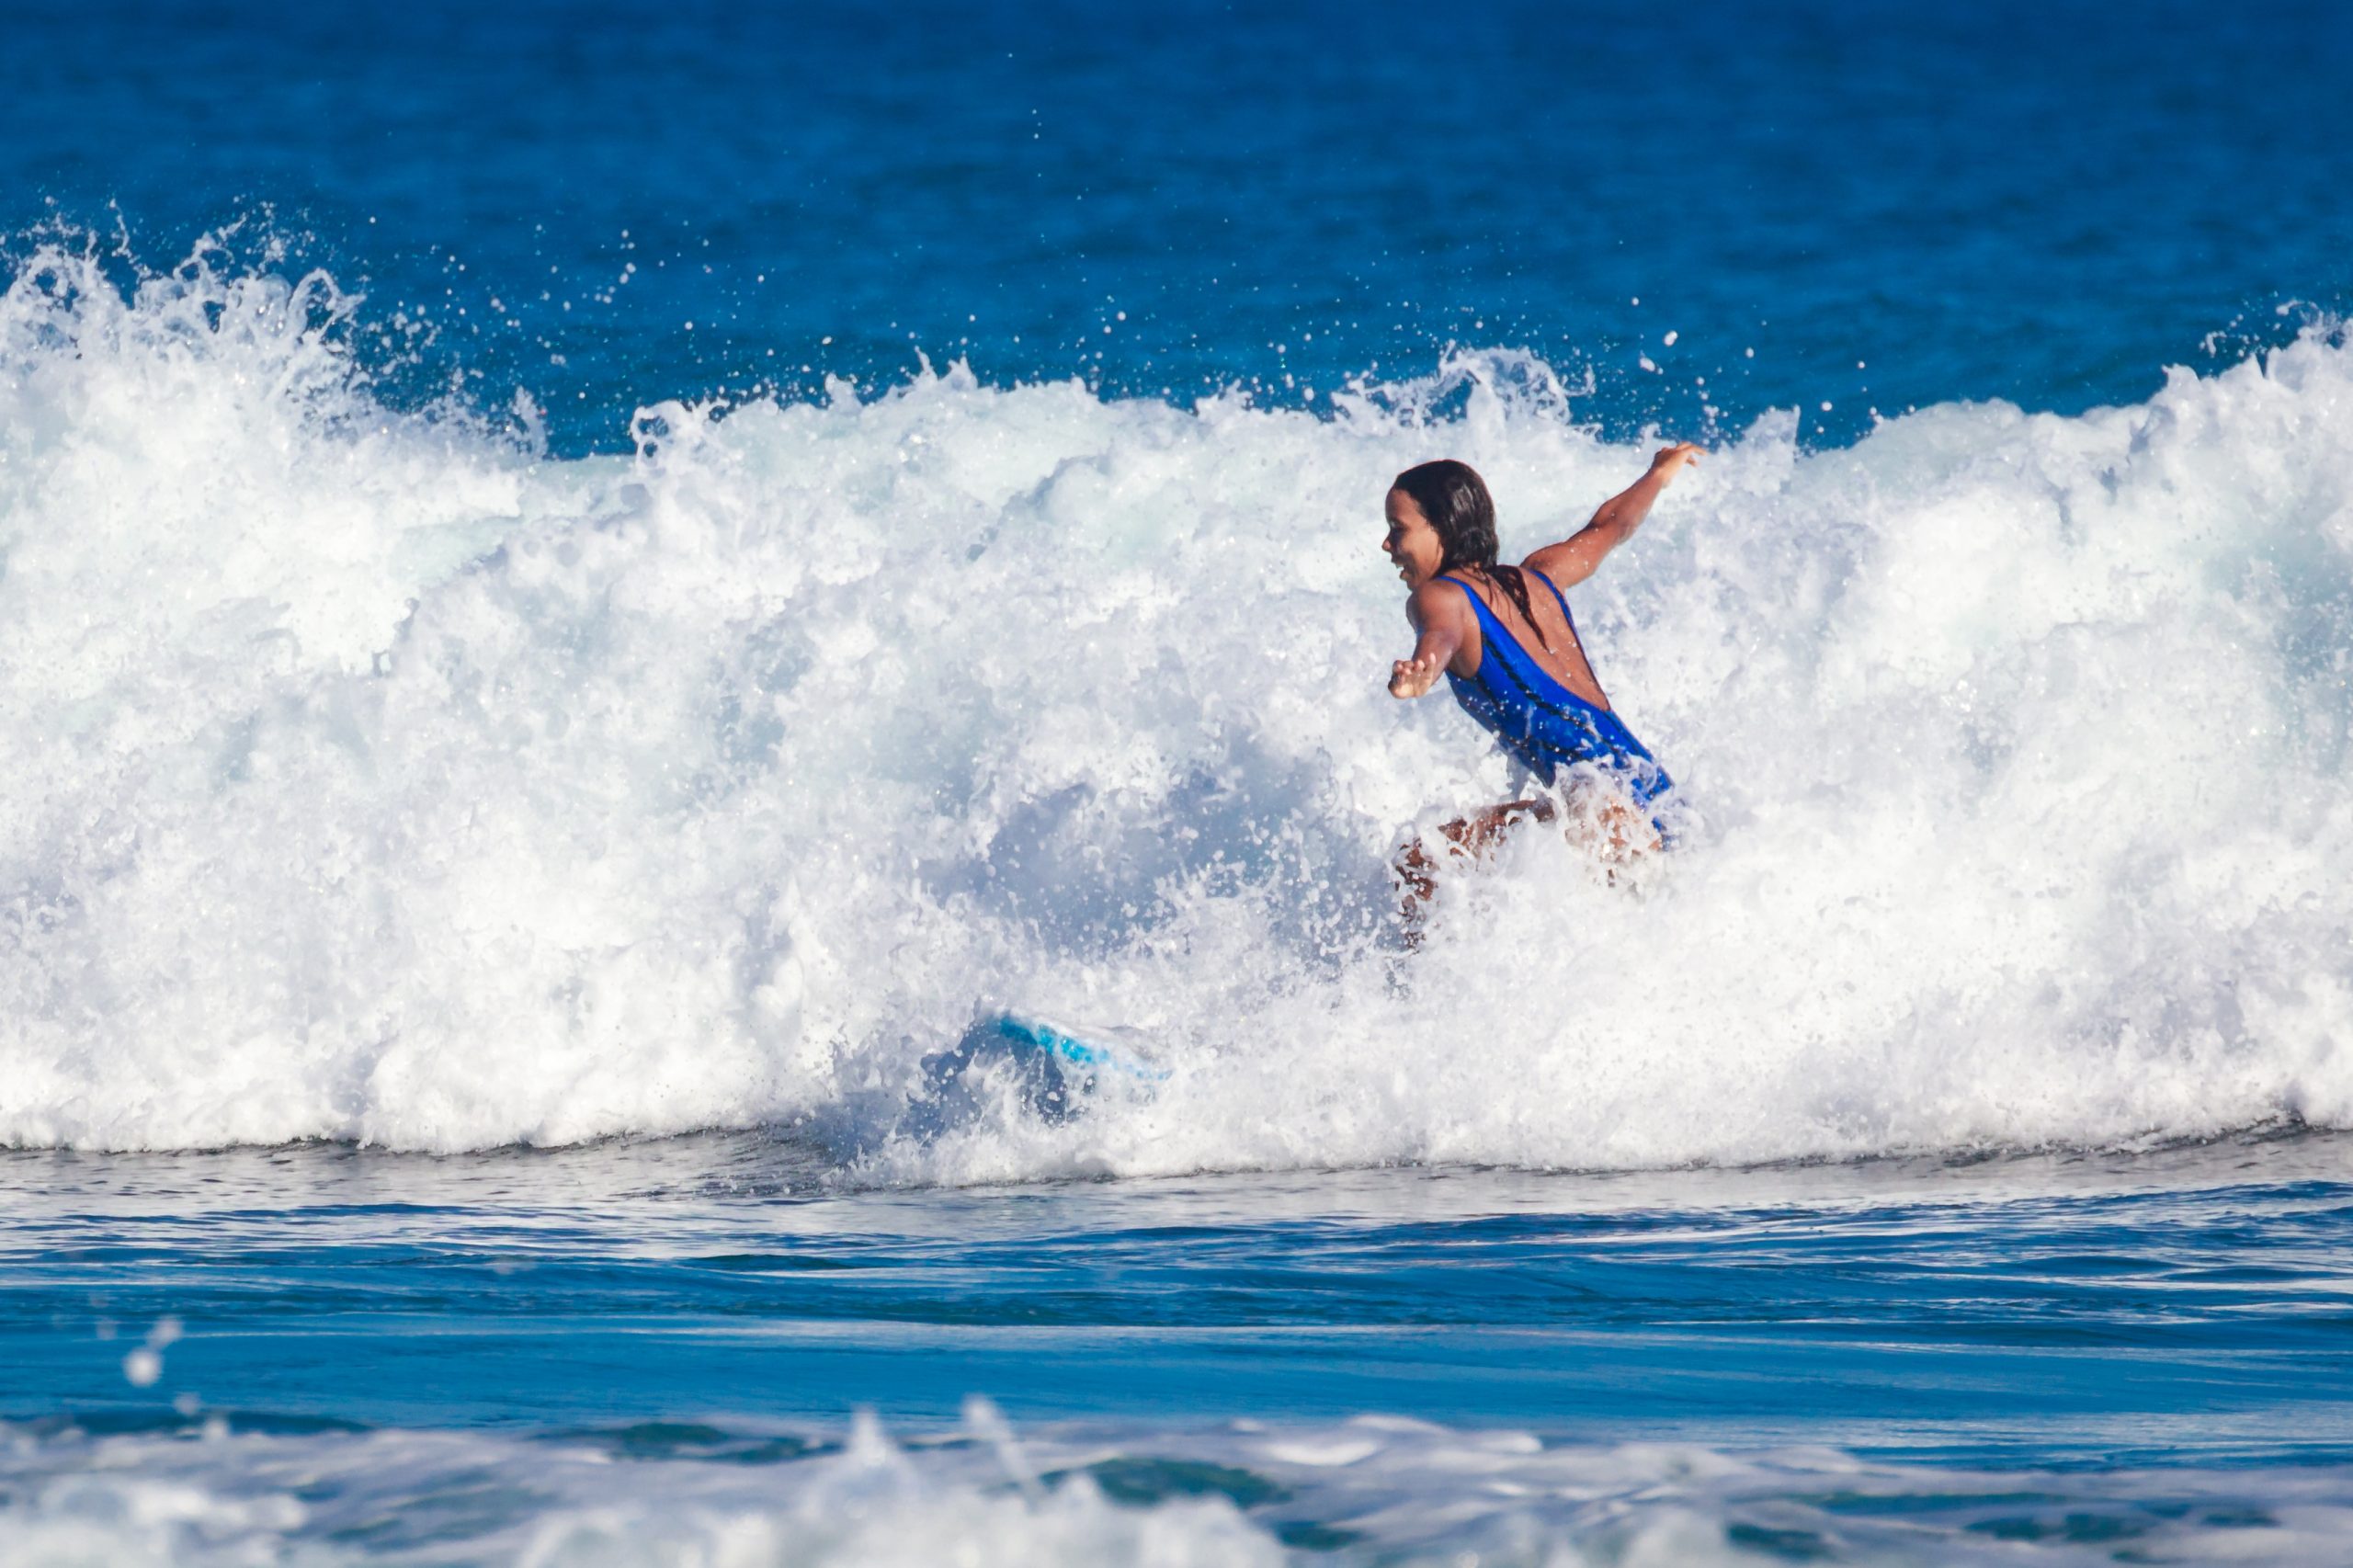 The Best Popular Caribbean Countries for Surfing